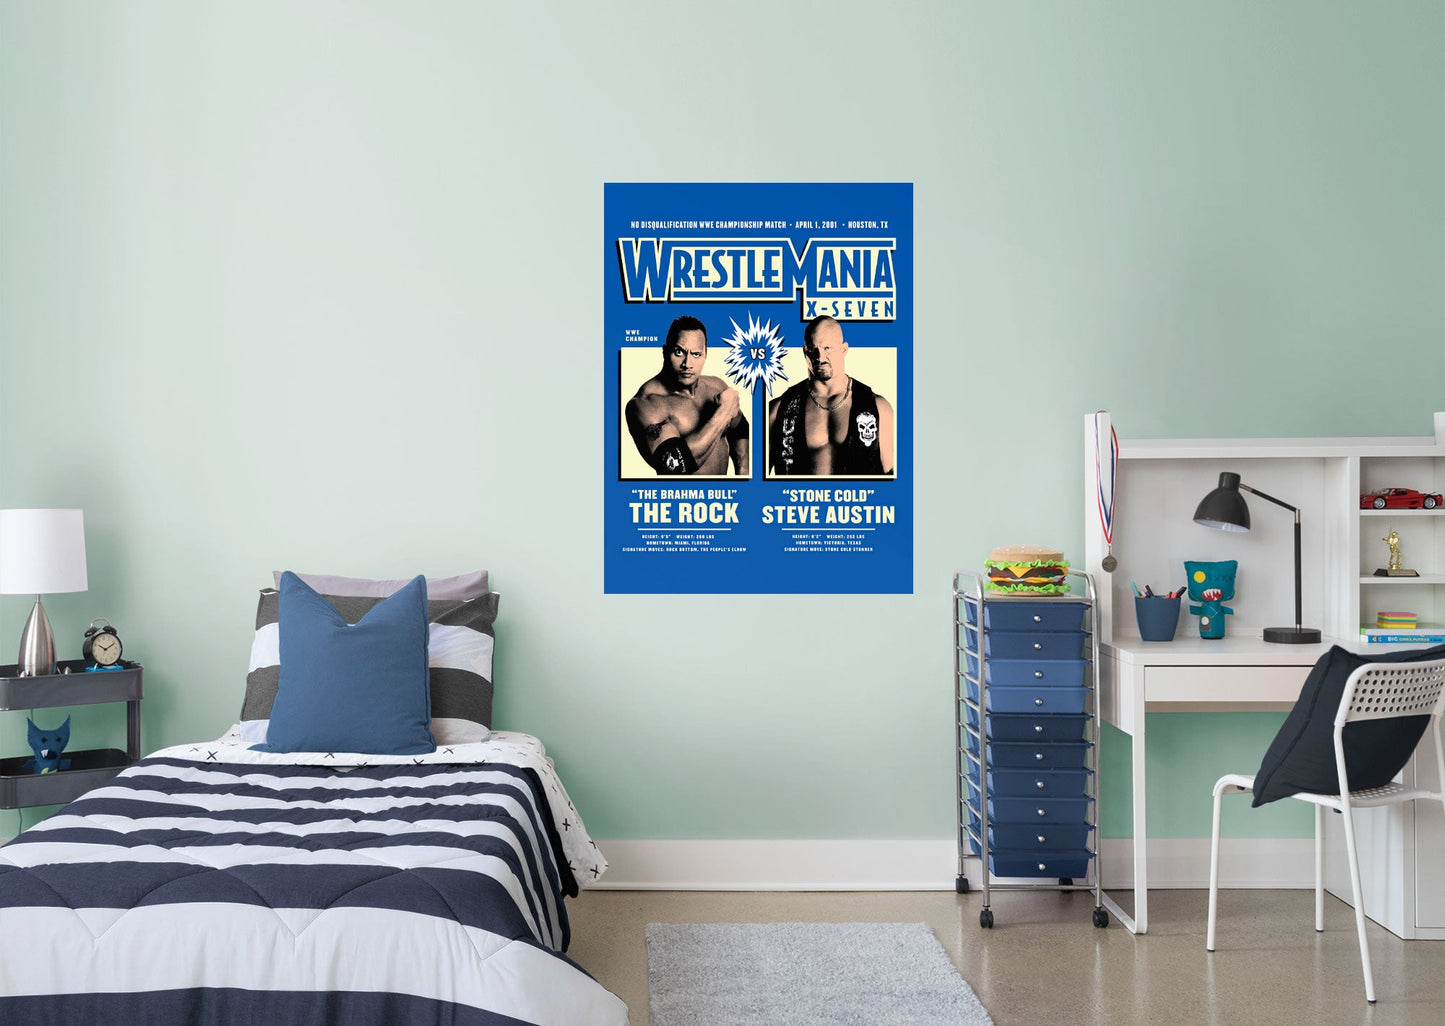 The Rock and Stone Cold Steve Austin Wrestlemania 17 Poster        - Officially Licensed WWE Removable Wall   Adhesive Decal